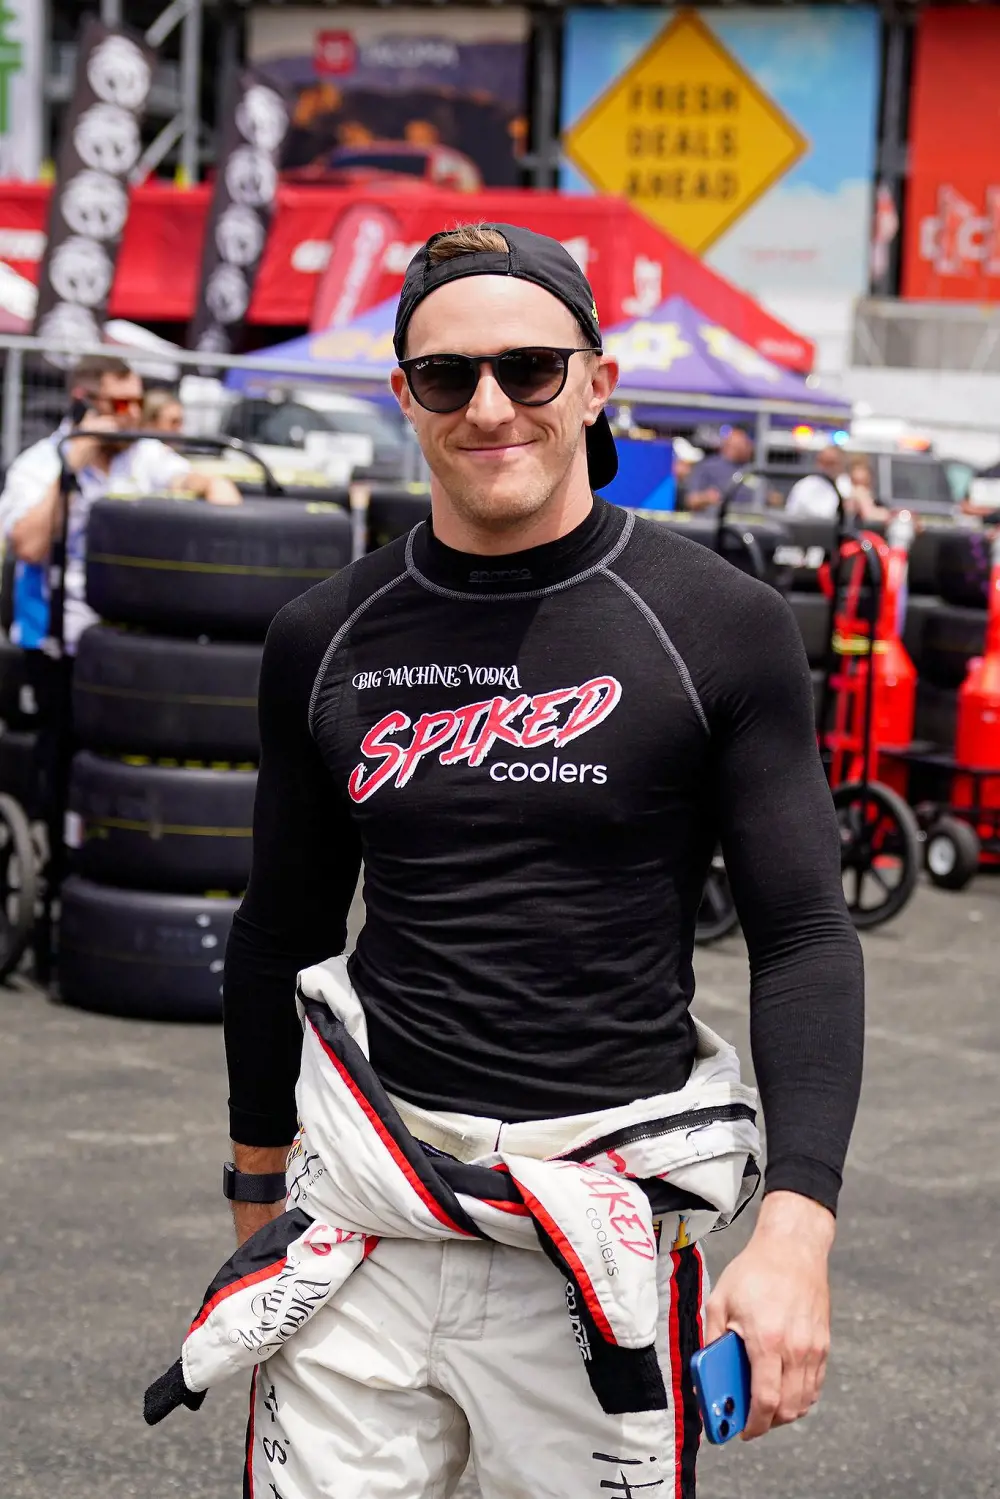 Full-time racer in the Xfinity Series, Kligerman is also an enthusiastic pit reporter